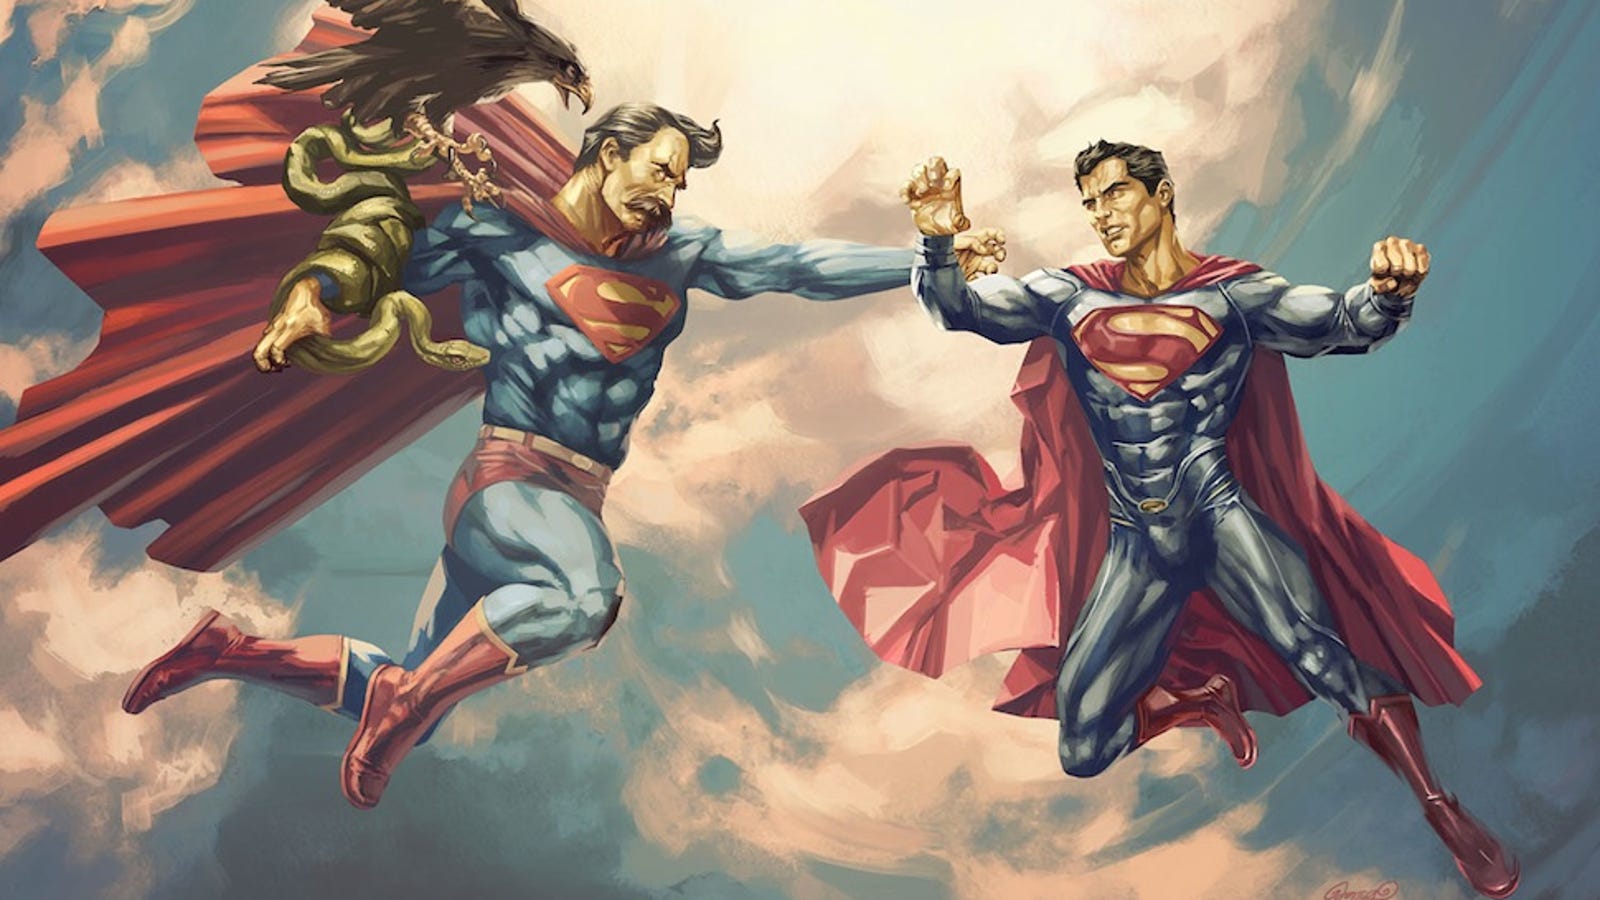 Who would win in a fight between Superman and Nietzsche's 